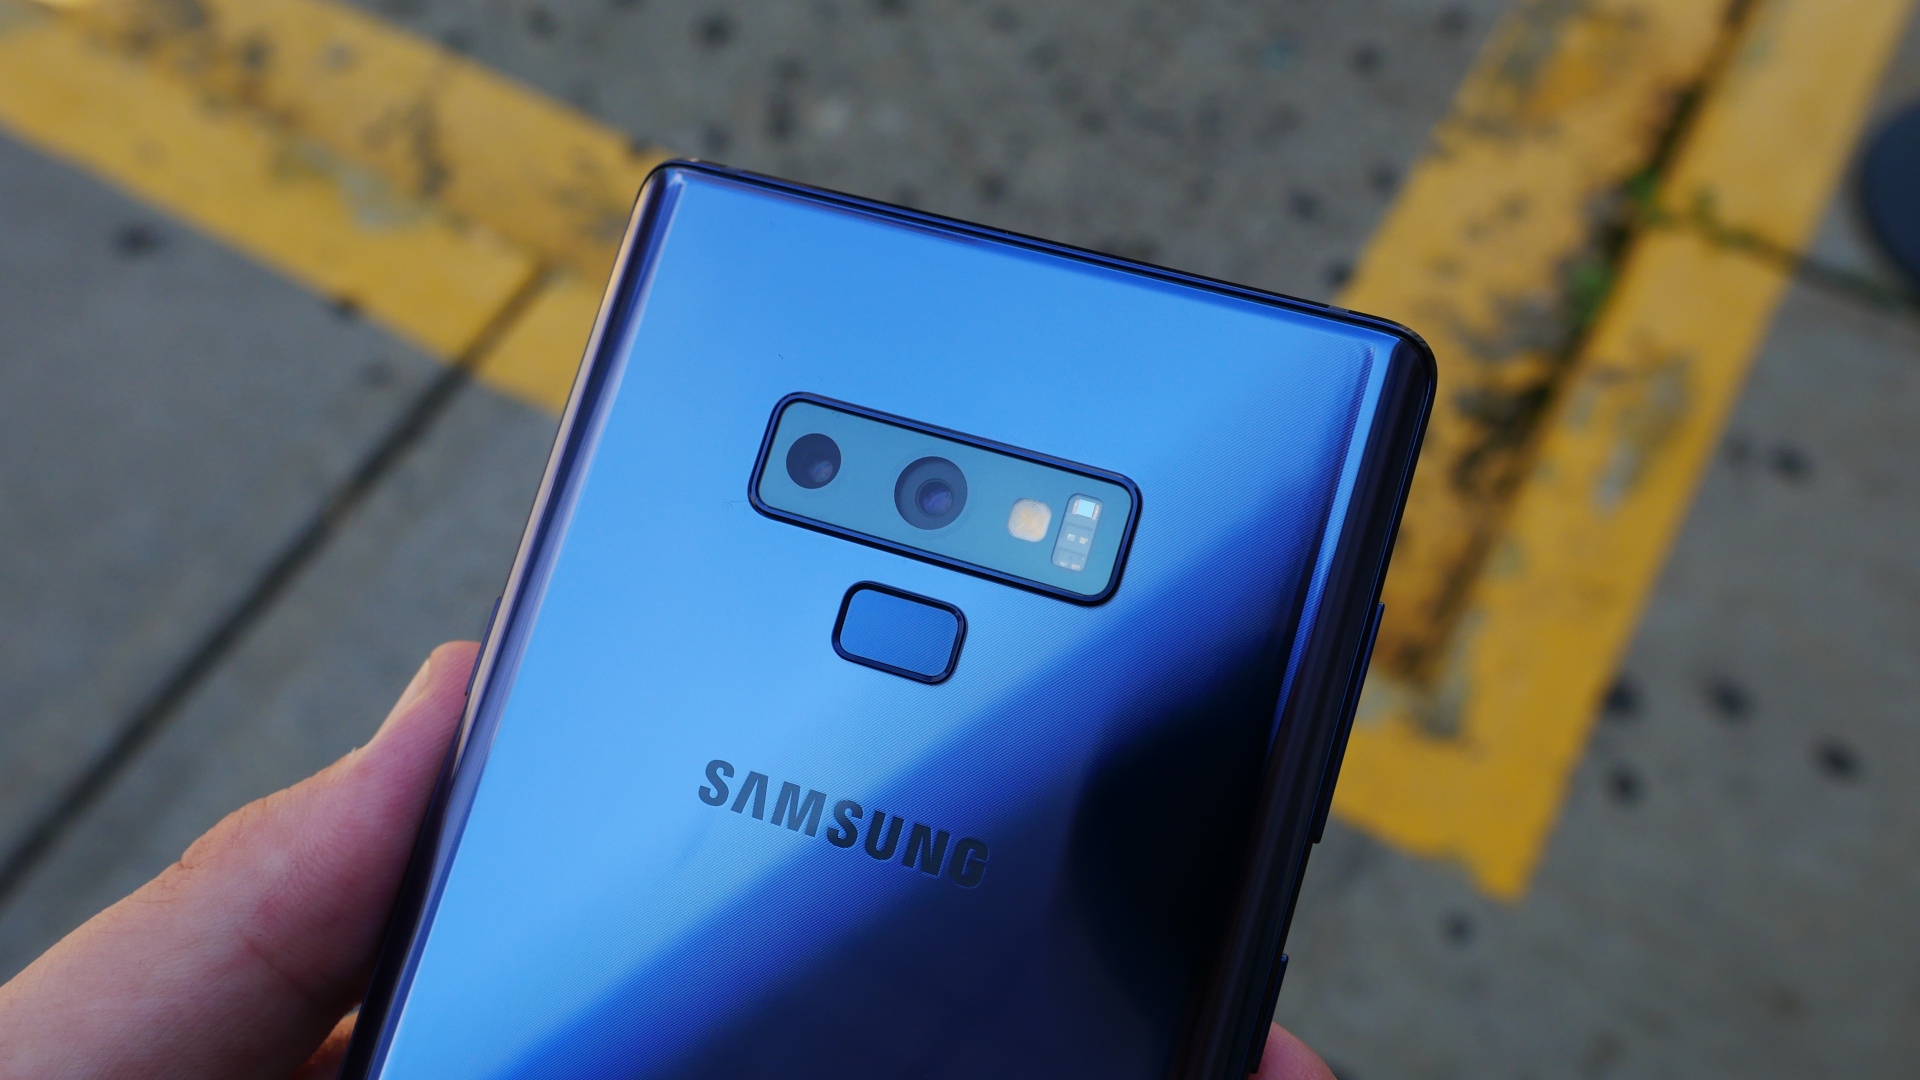 Camera Night Mode For Galaxy Note 9 Arrives With Latest Monthly